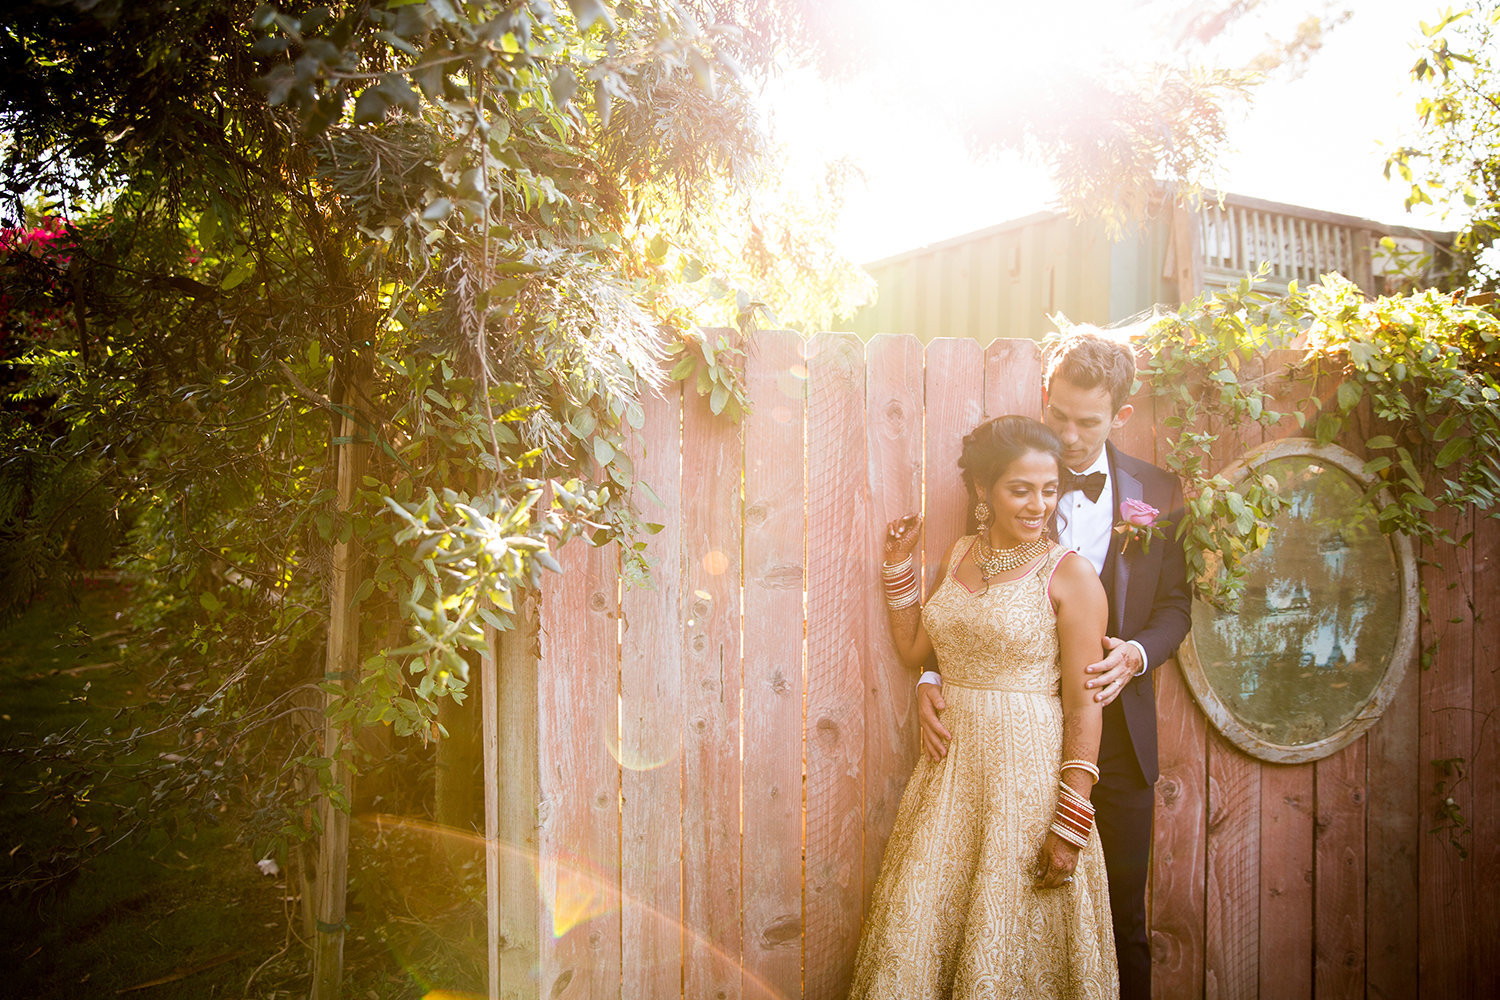 Sunlight Flare with a lovely Hindu Bride and Groom in a Garden